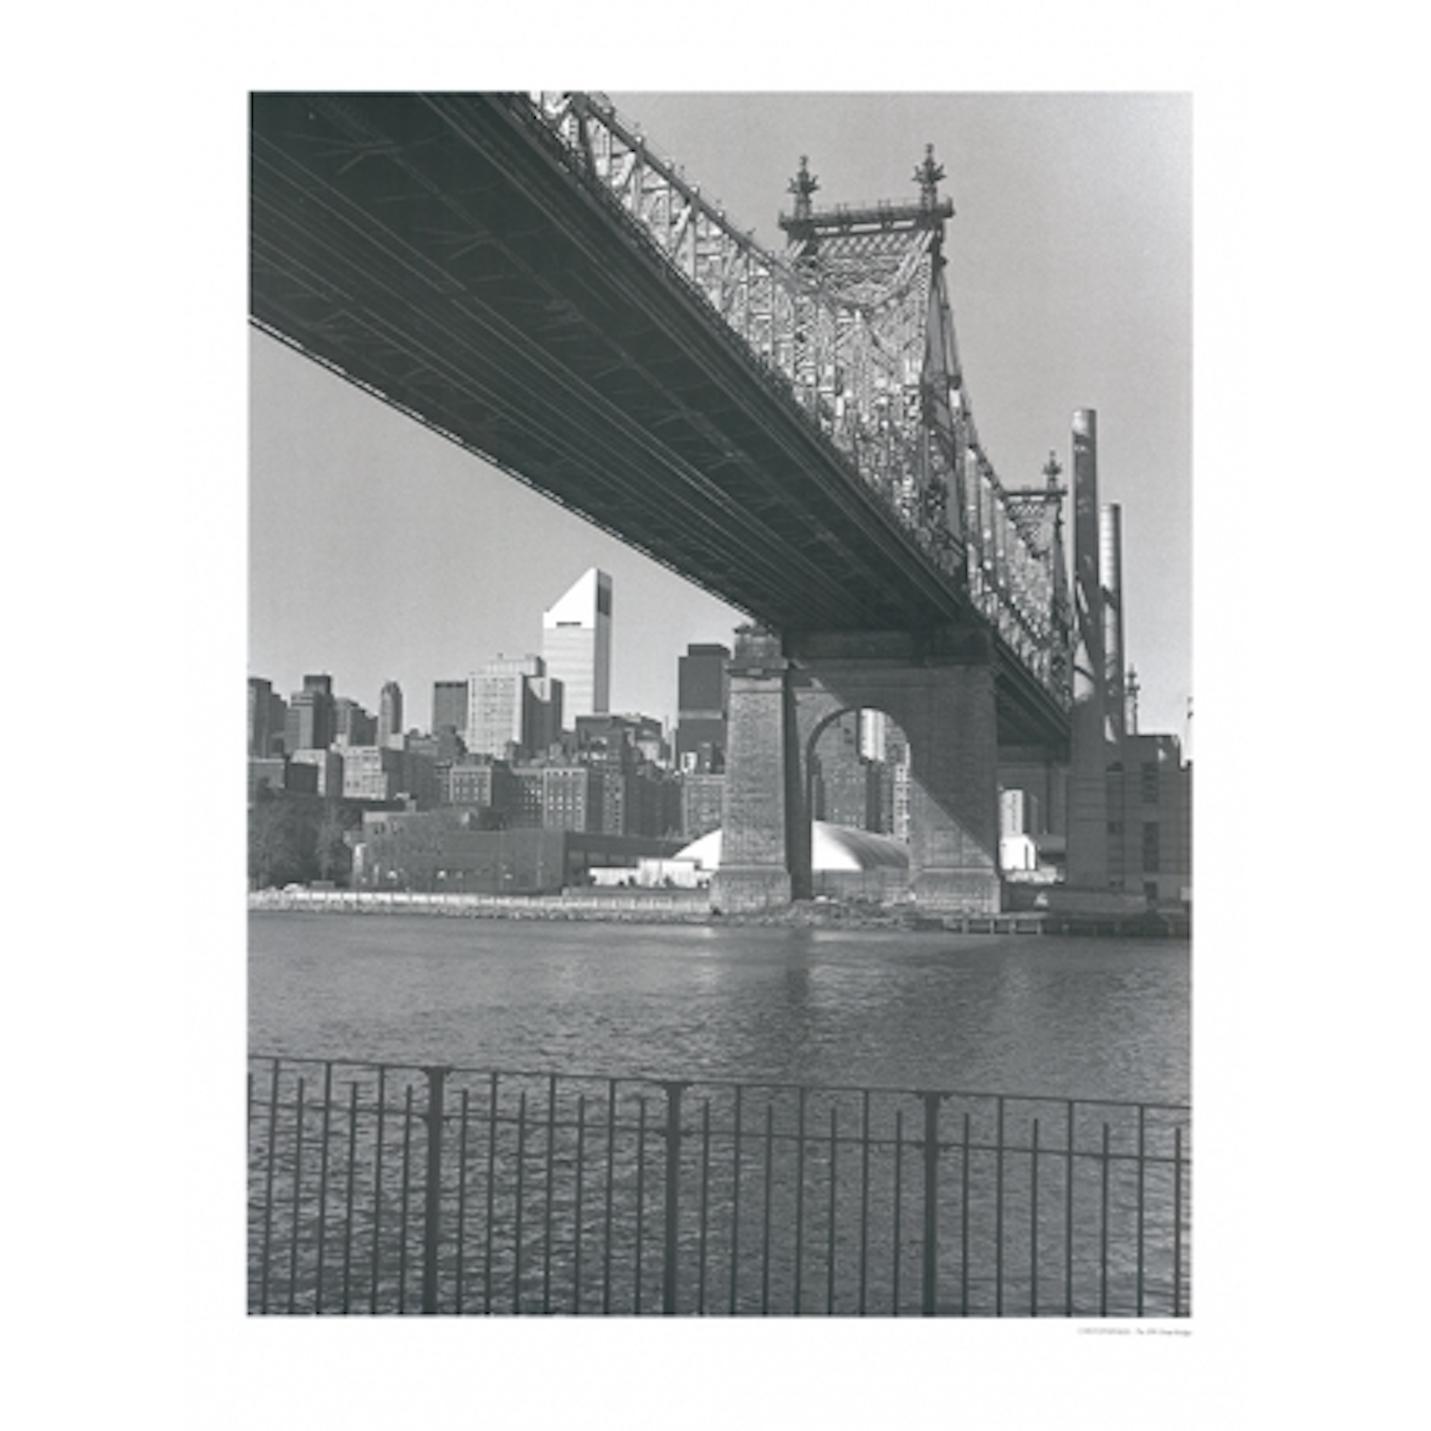 An image that captures the essence of New York City. The iconic dynamism of Brooklyn Bridge in black and white from Street 59th.
Christopher Bliss is a New York based photographer who has always been attracted to the many facets of metropolitan